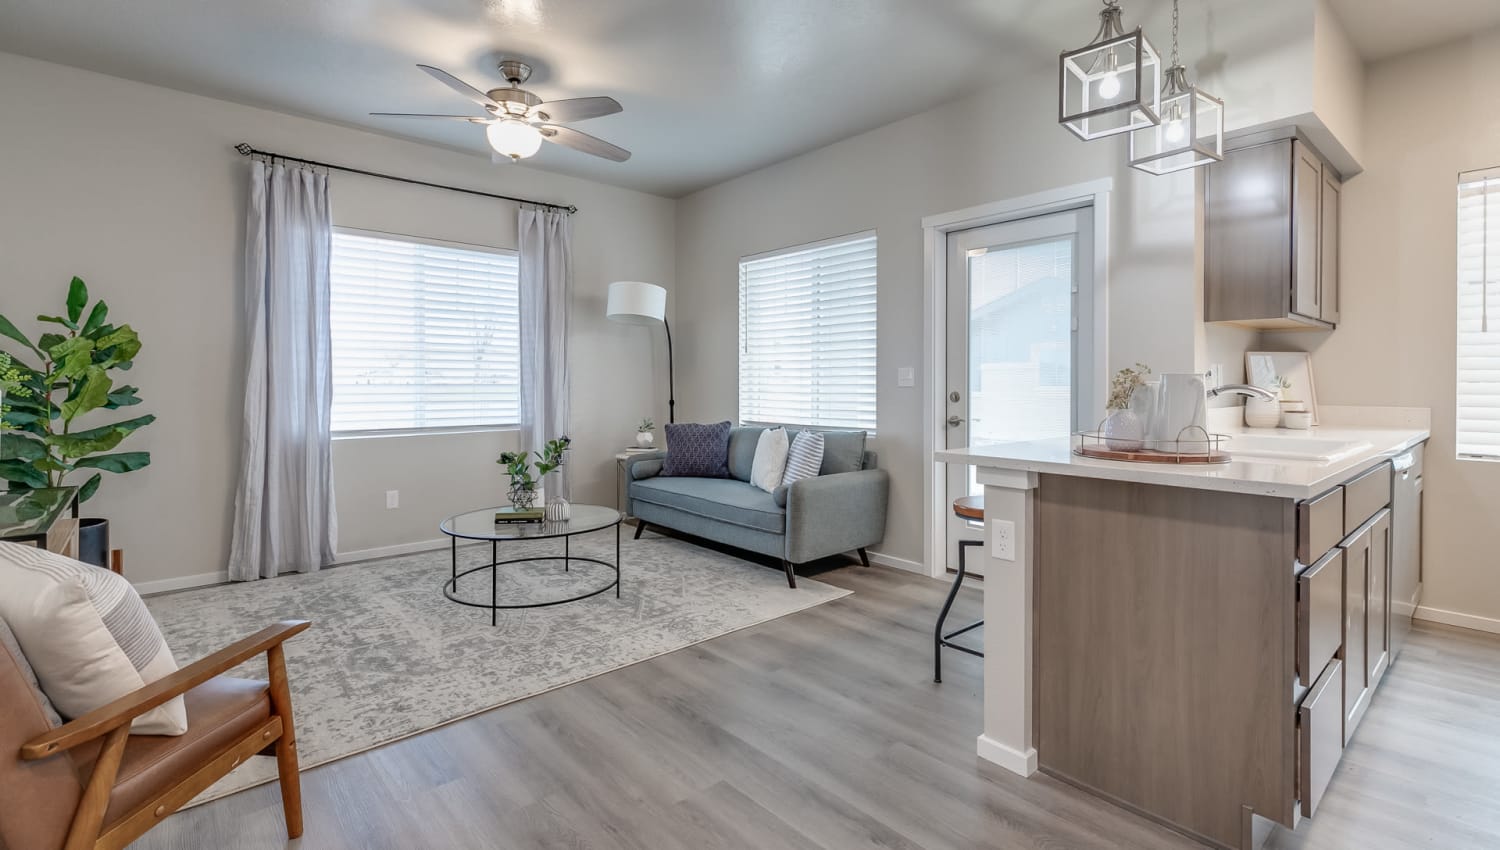 Model apartment with an expansive open floorplan at Olympus at Ten Mile in Meridian, Idaho